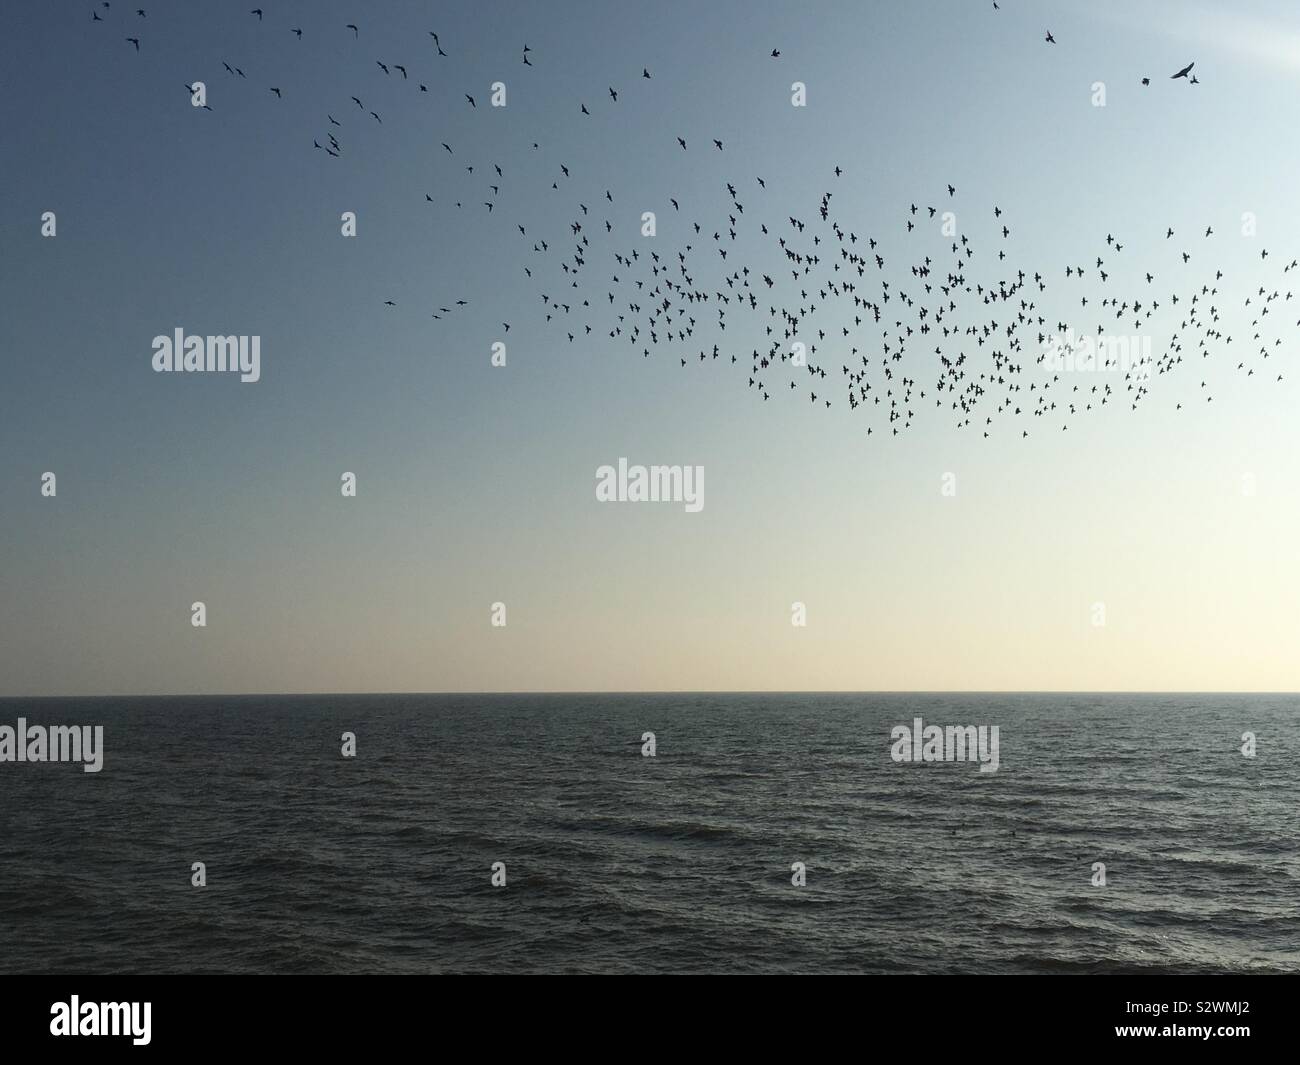 A flock of birds flying over the sea. Stock Photo